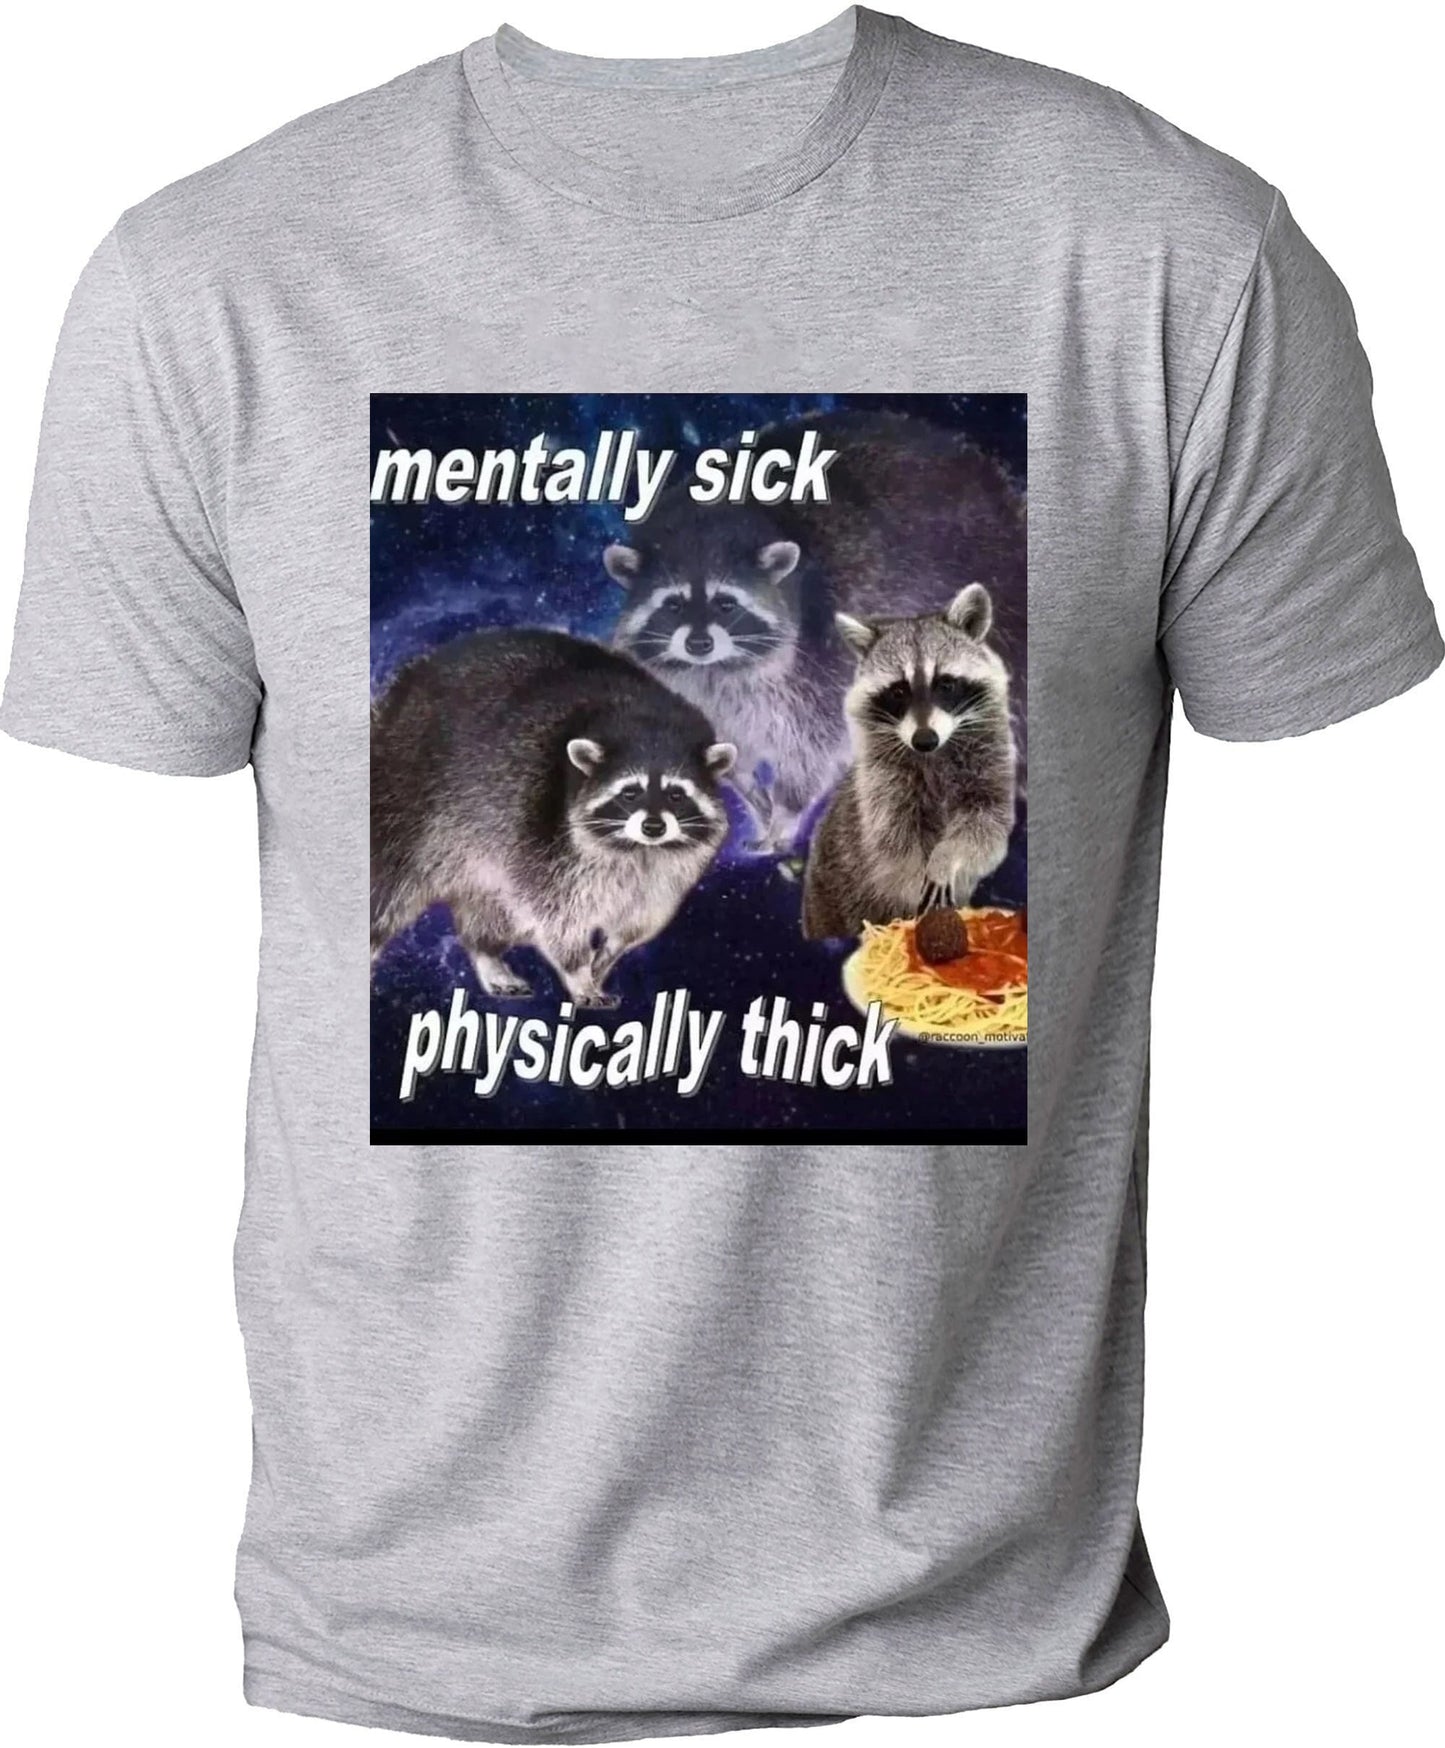 Physically thick Men's T-shirt